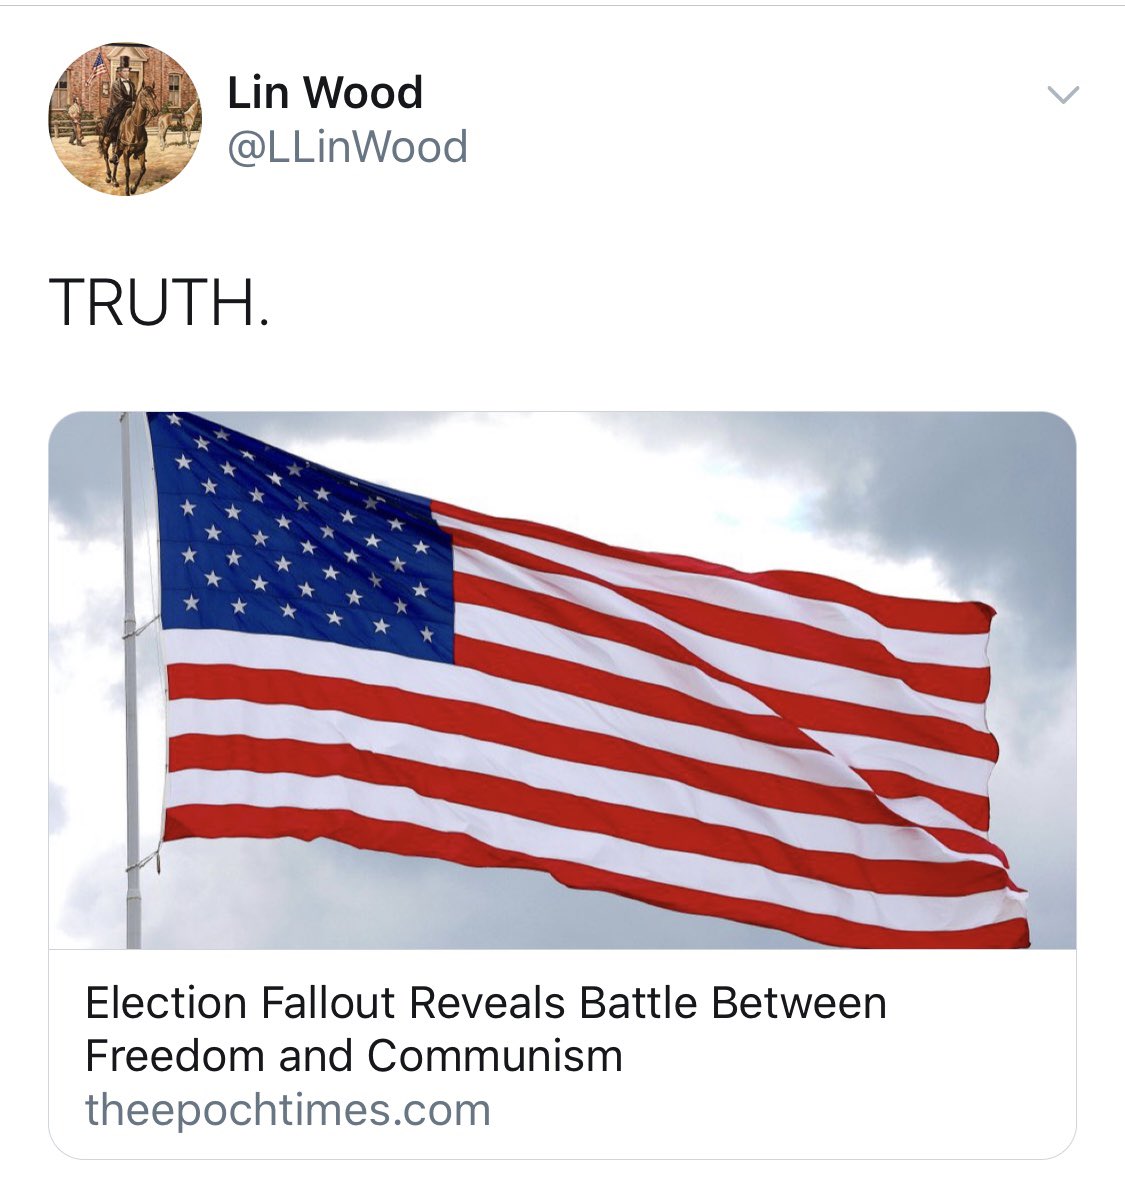 Fanatical  #Trump supporting Chinese ex-dissidents in the  #US also drawing on material from Sidney Powel / Lin Wood (apparently actual lawyers) who’re running “Communist” “big tech” conspiracies. Wood’s feed especially unhinged; gifs, ranting + yes the “Epoch Times” aka Falun Gong